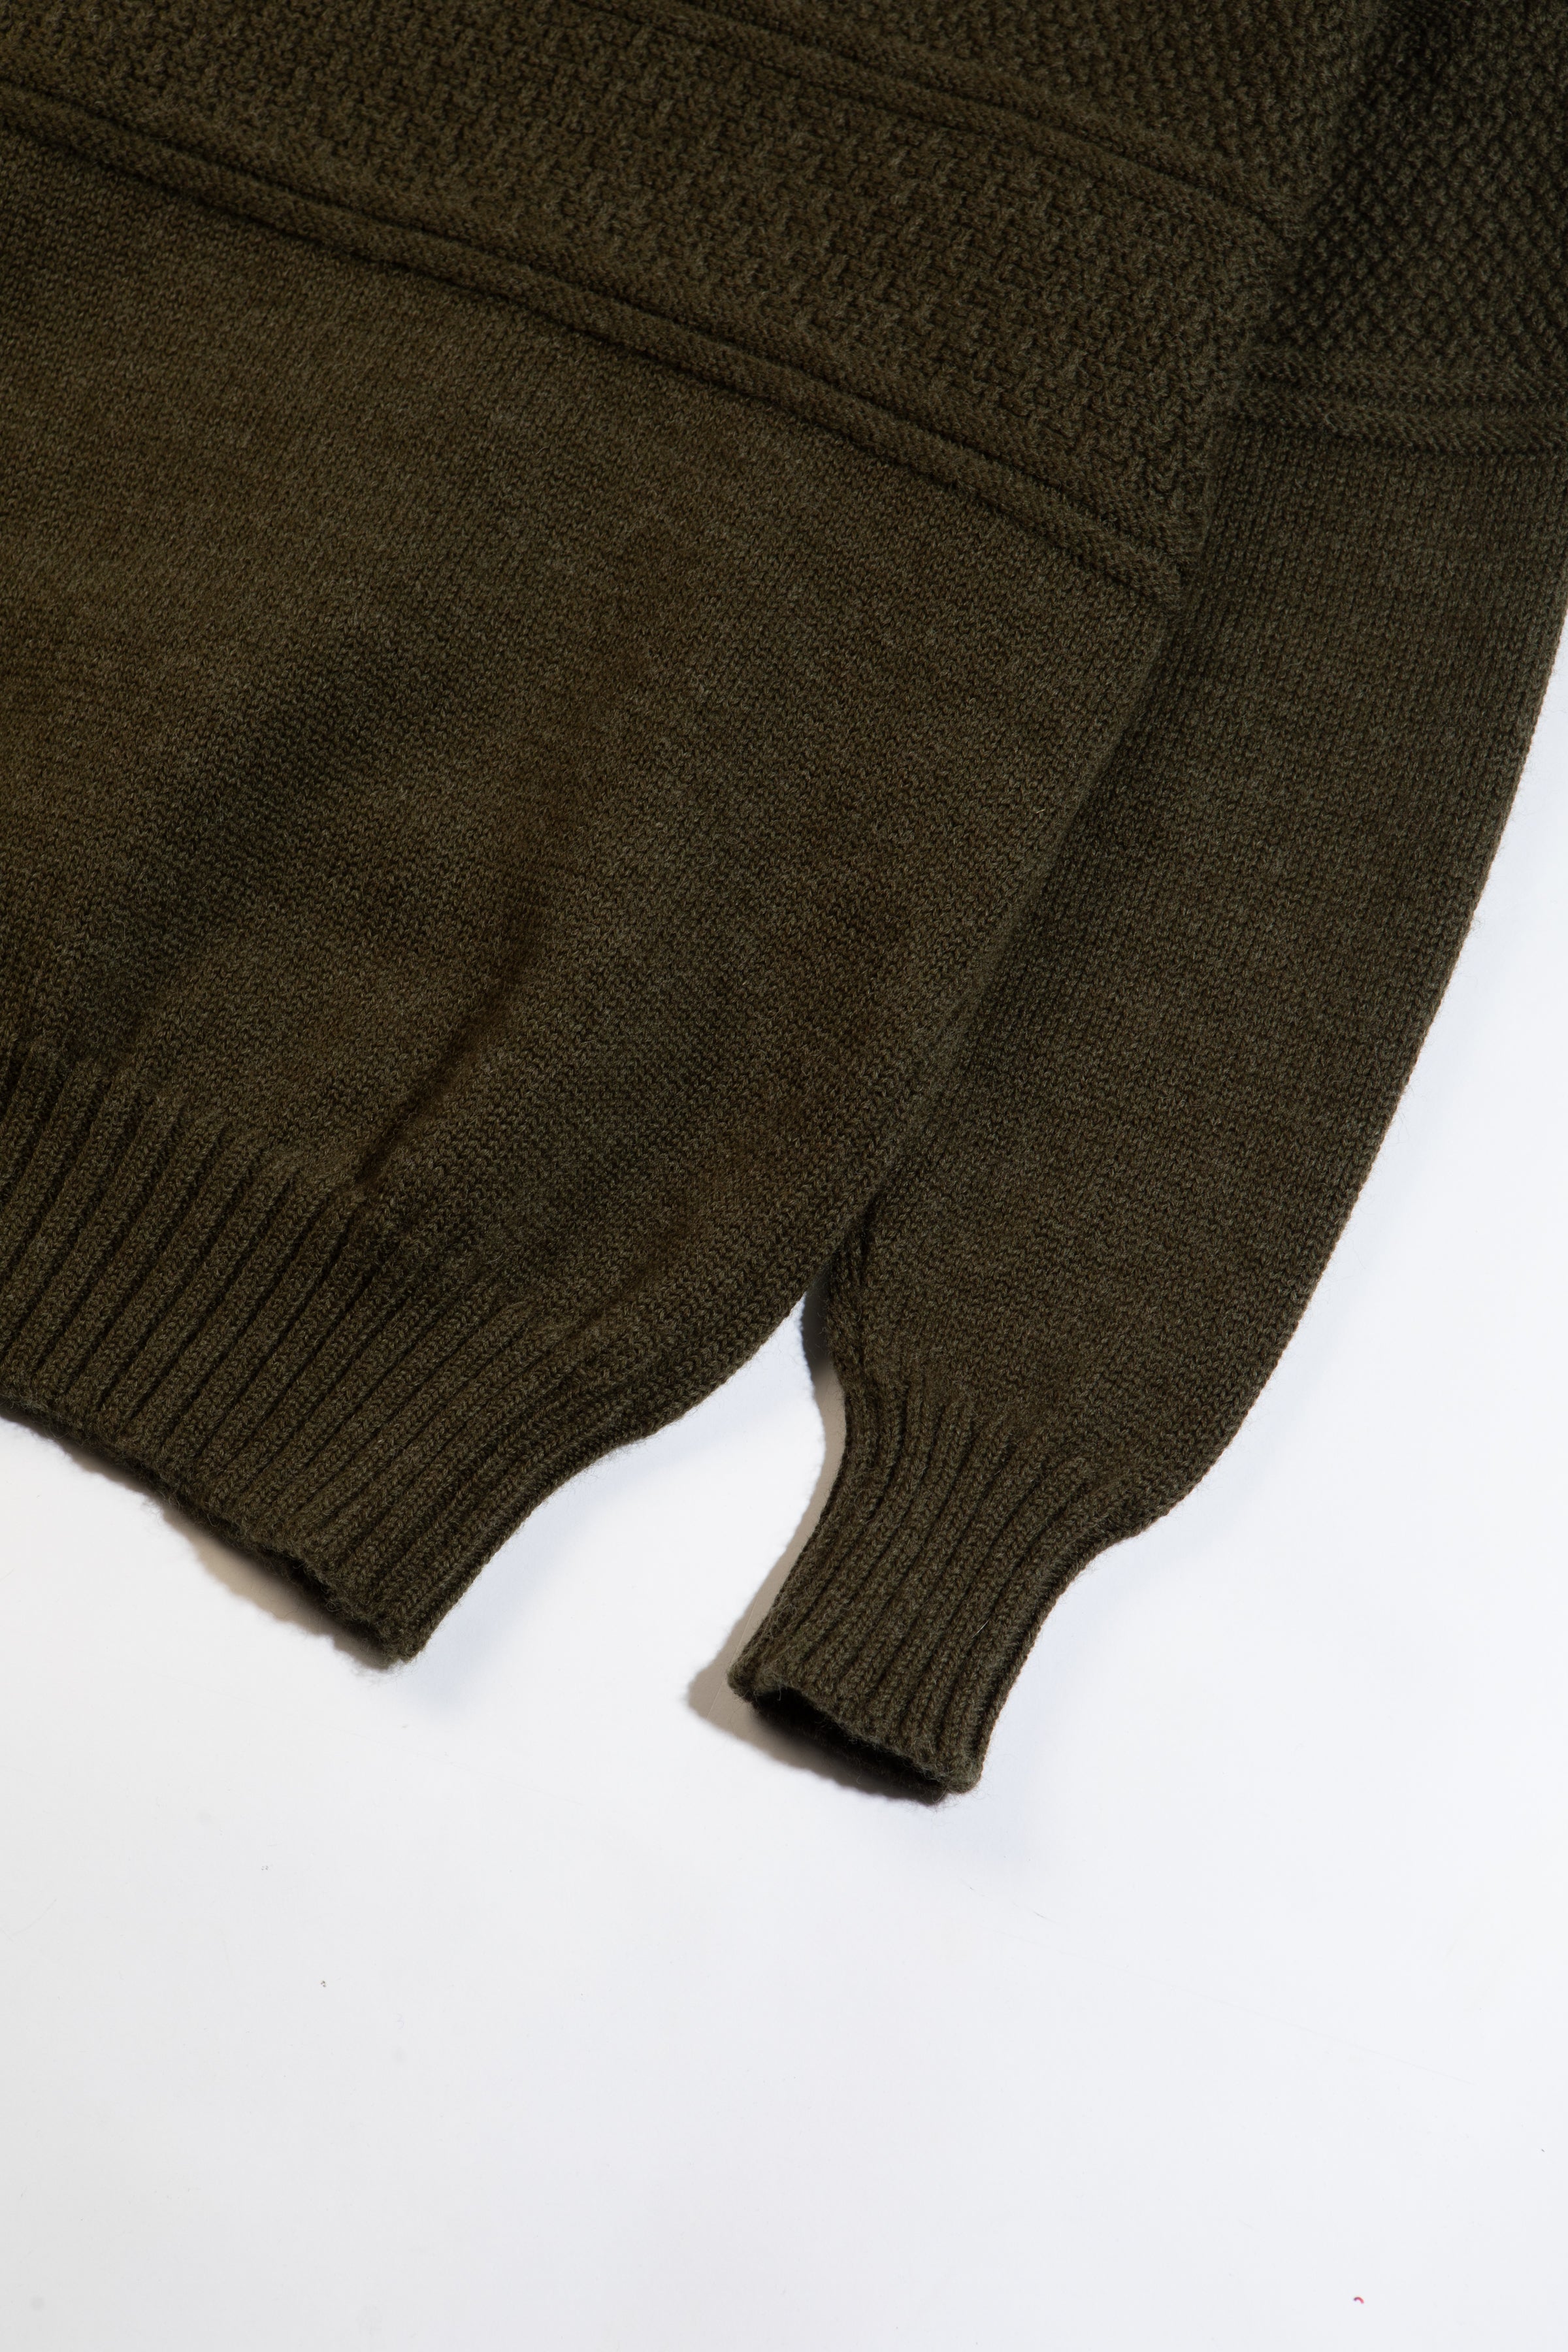 The ribbed hem and cuff of a knitted wool sweater in olive green, on a white background.